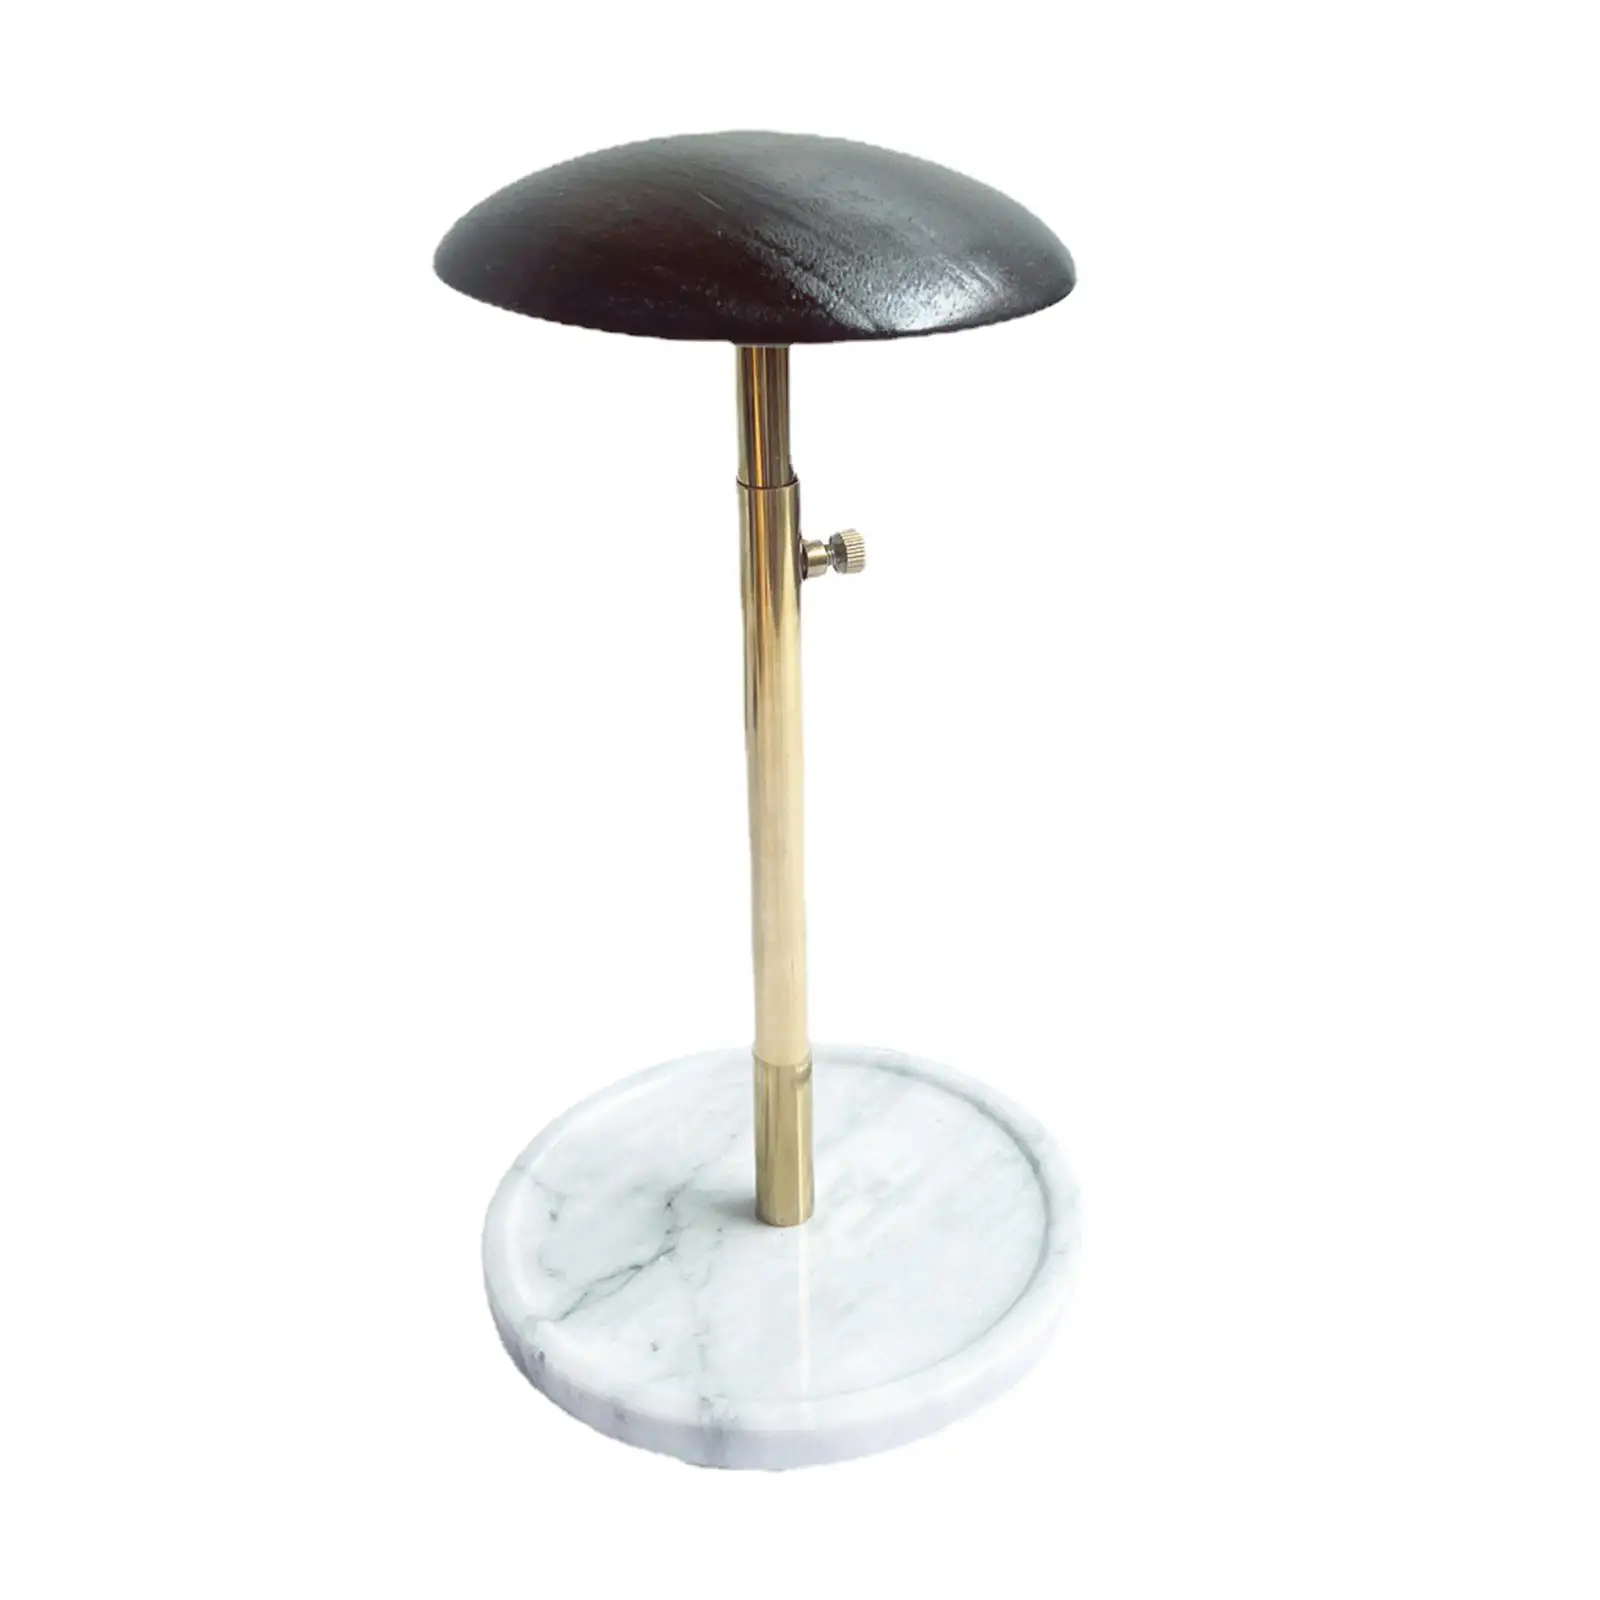 Creative Hat Display Stand Wig Holder Marble Bottom Storage Rack Home Salon Styling Adjustable Height Hair Drying Hat Head Stand